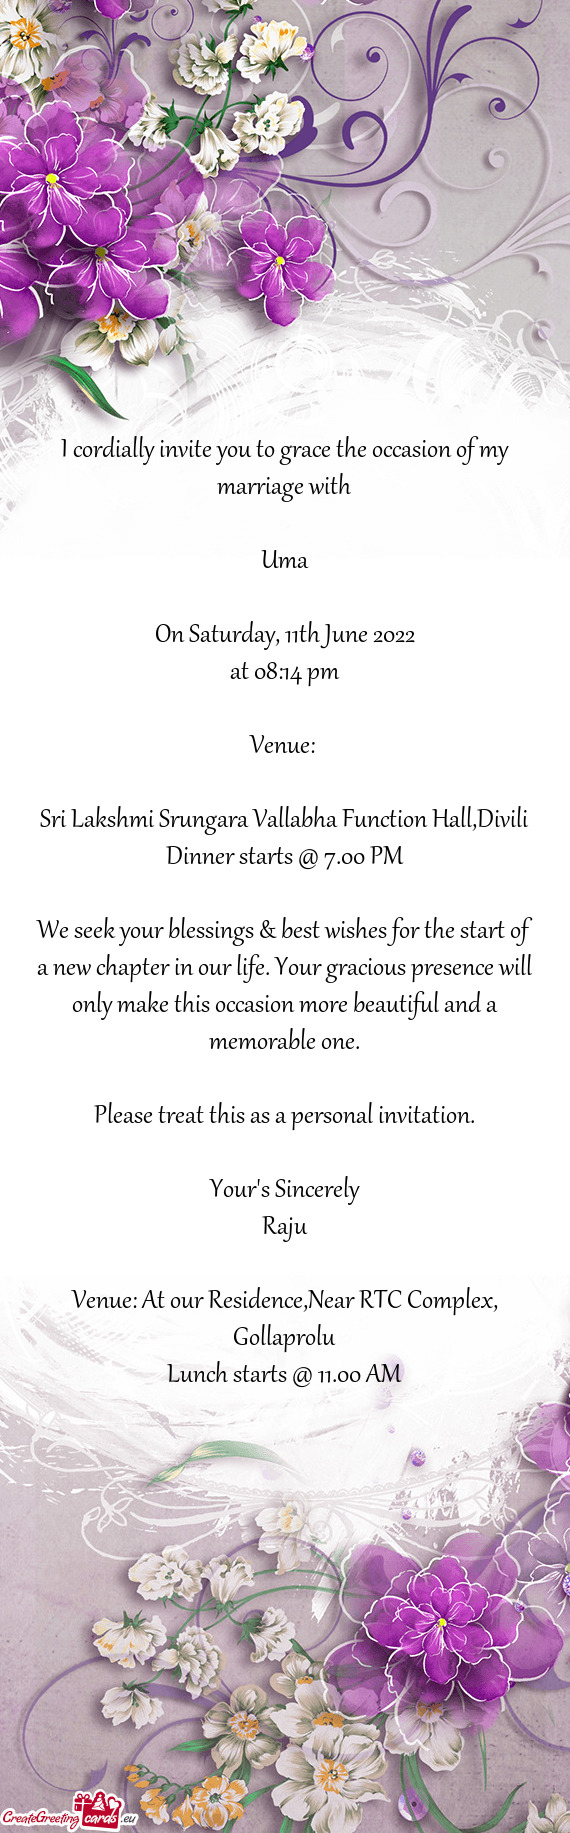 I cordially invite you to grace the occasion of my marriage with